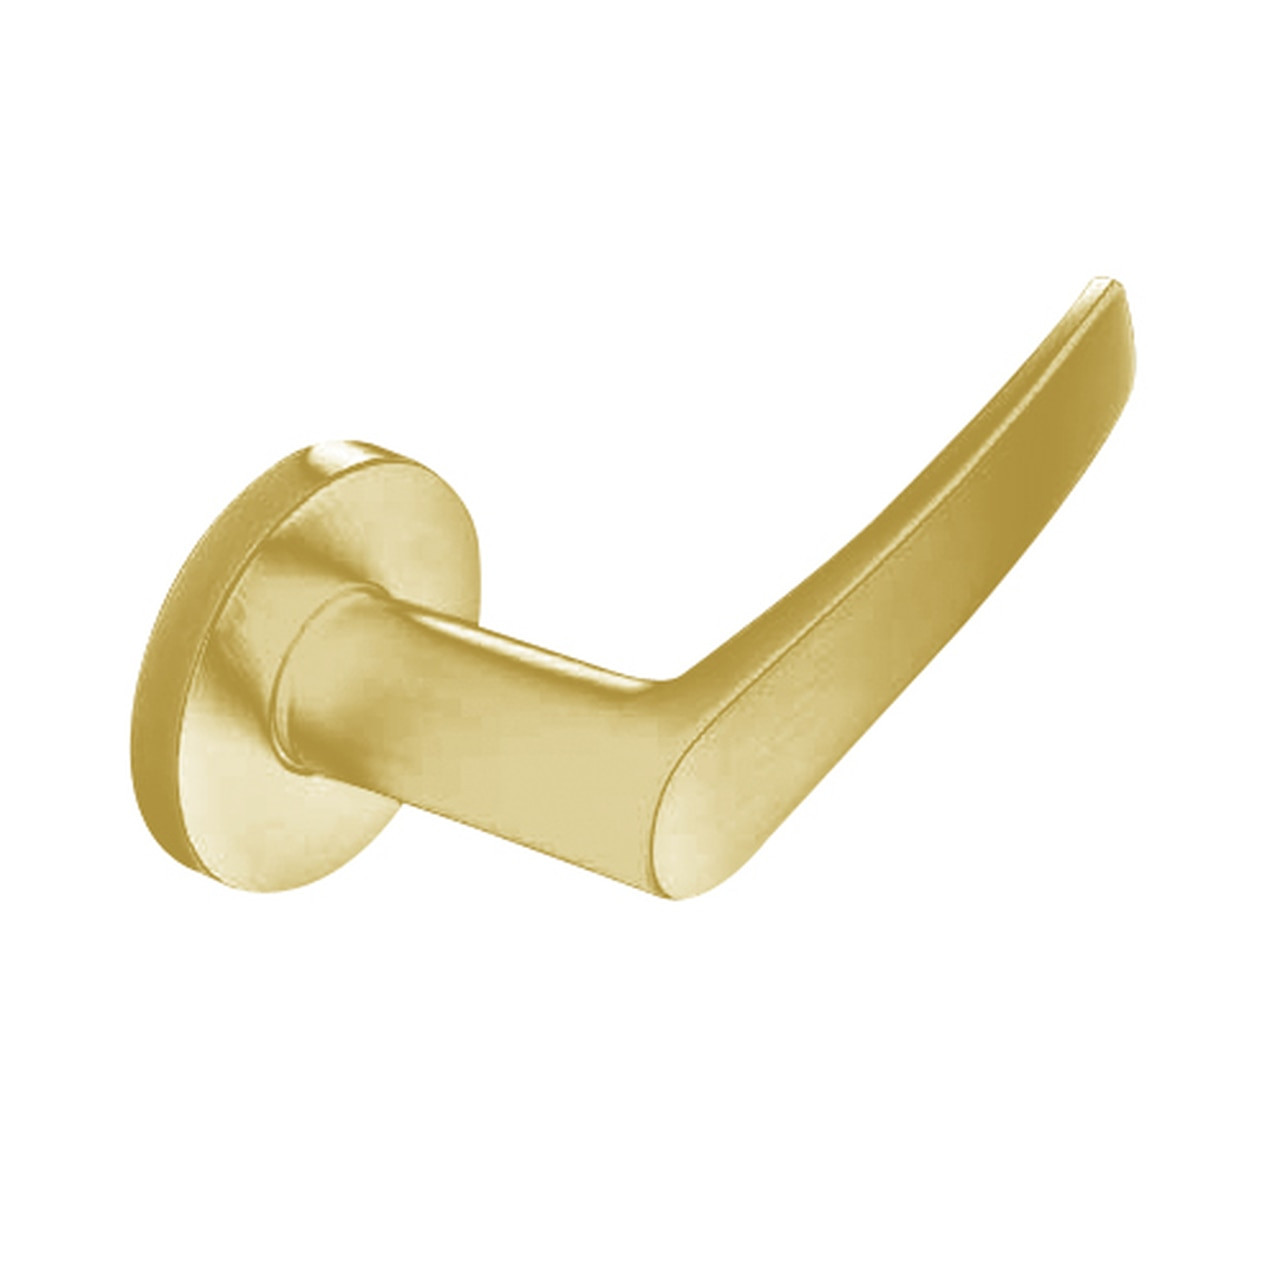 ML2057-ASB-605-M31 Corbin Russwin ML2000 Series Mortise Storeroom Trim Pack with Armstrong Lever in Bright Brass